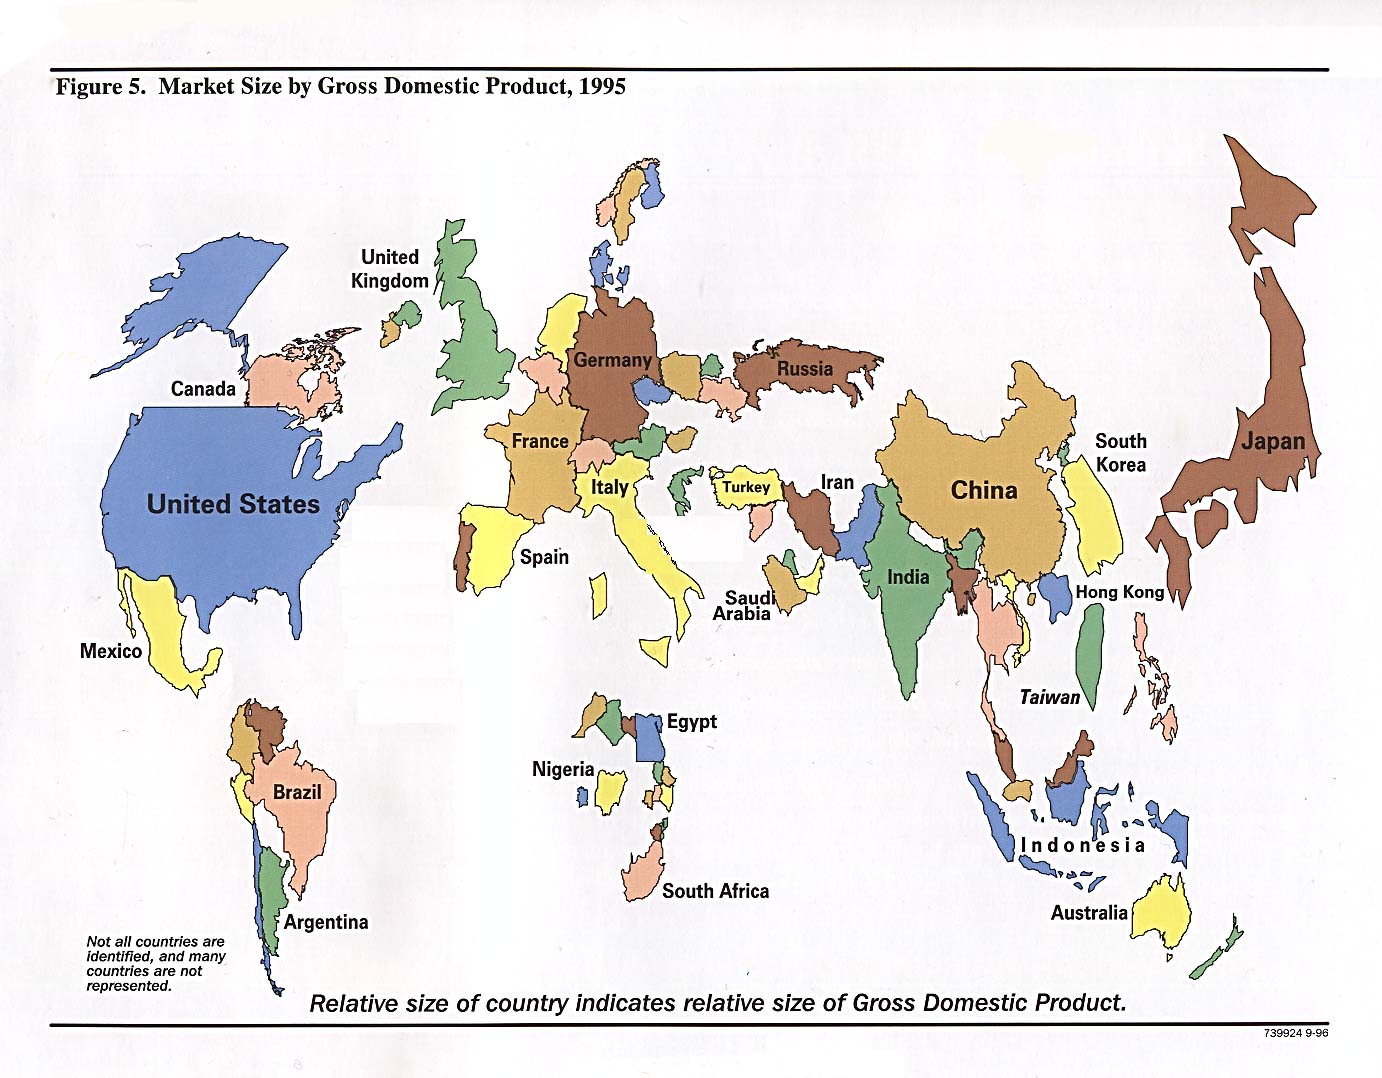 Map Of The World. World Market Size By Gross Domestic Product 1996 (215K) from Handbook of International Economic Statistics 